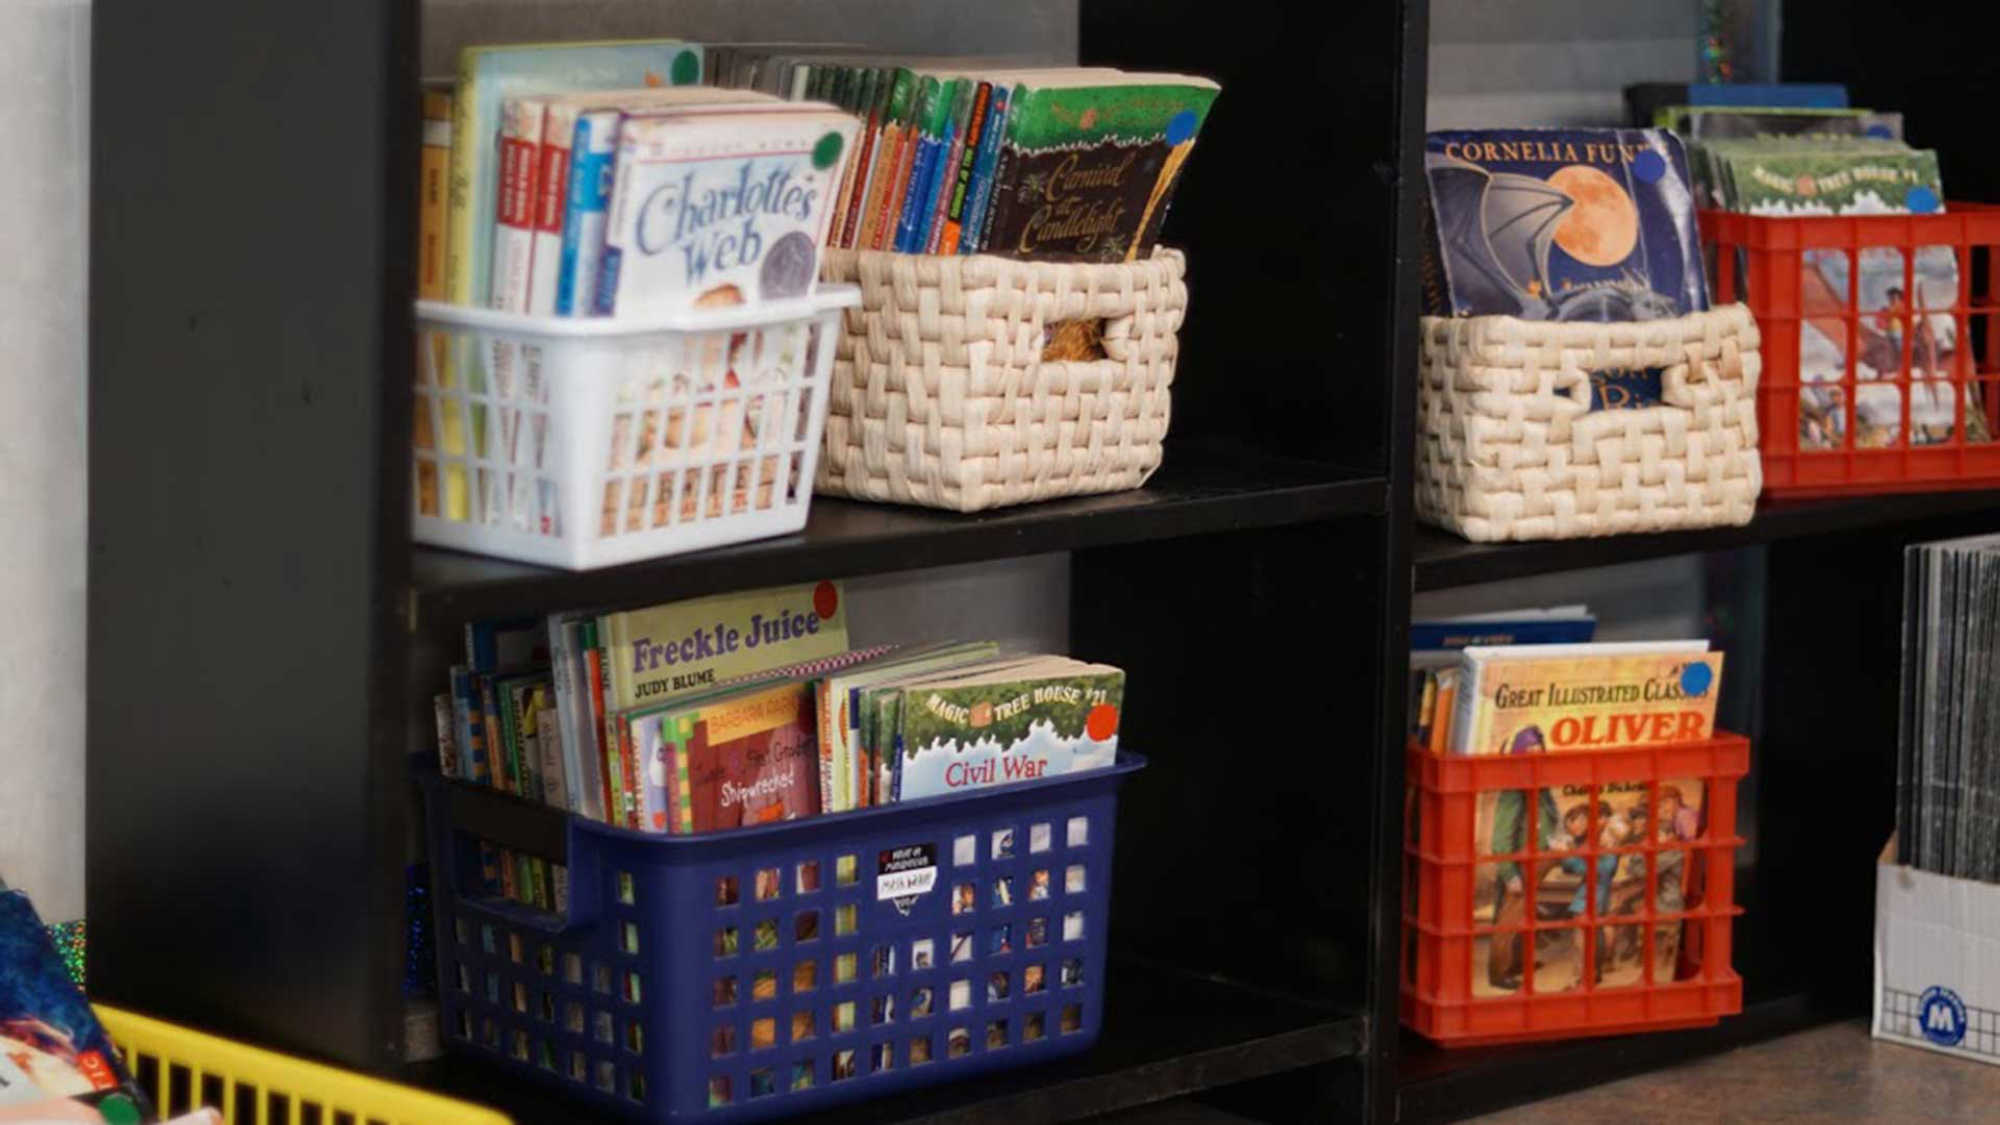 DI is a great place to find inexpensive books. The baskets and crates also came from DI.